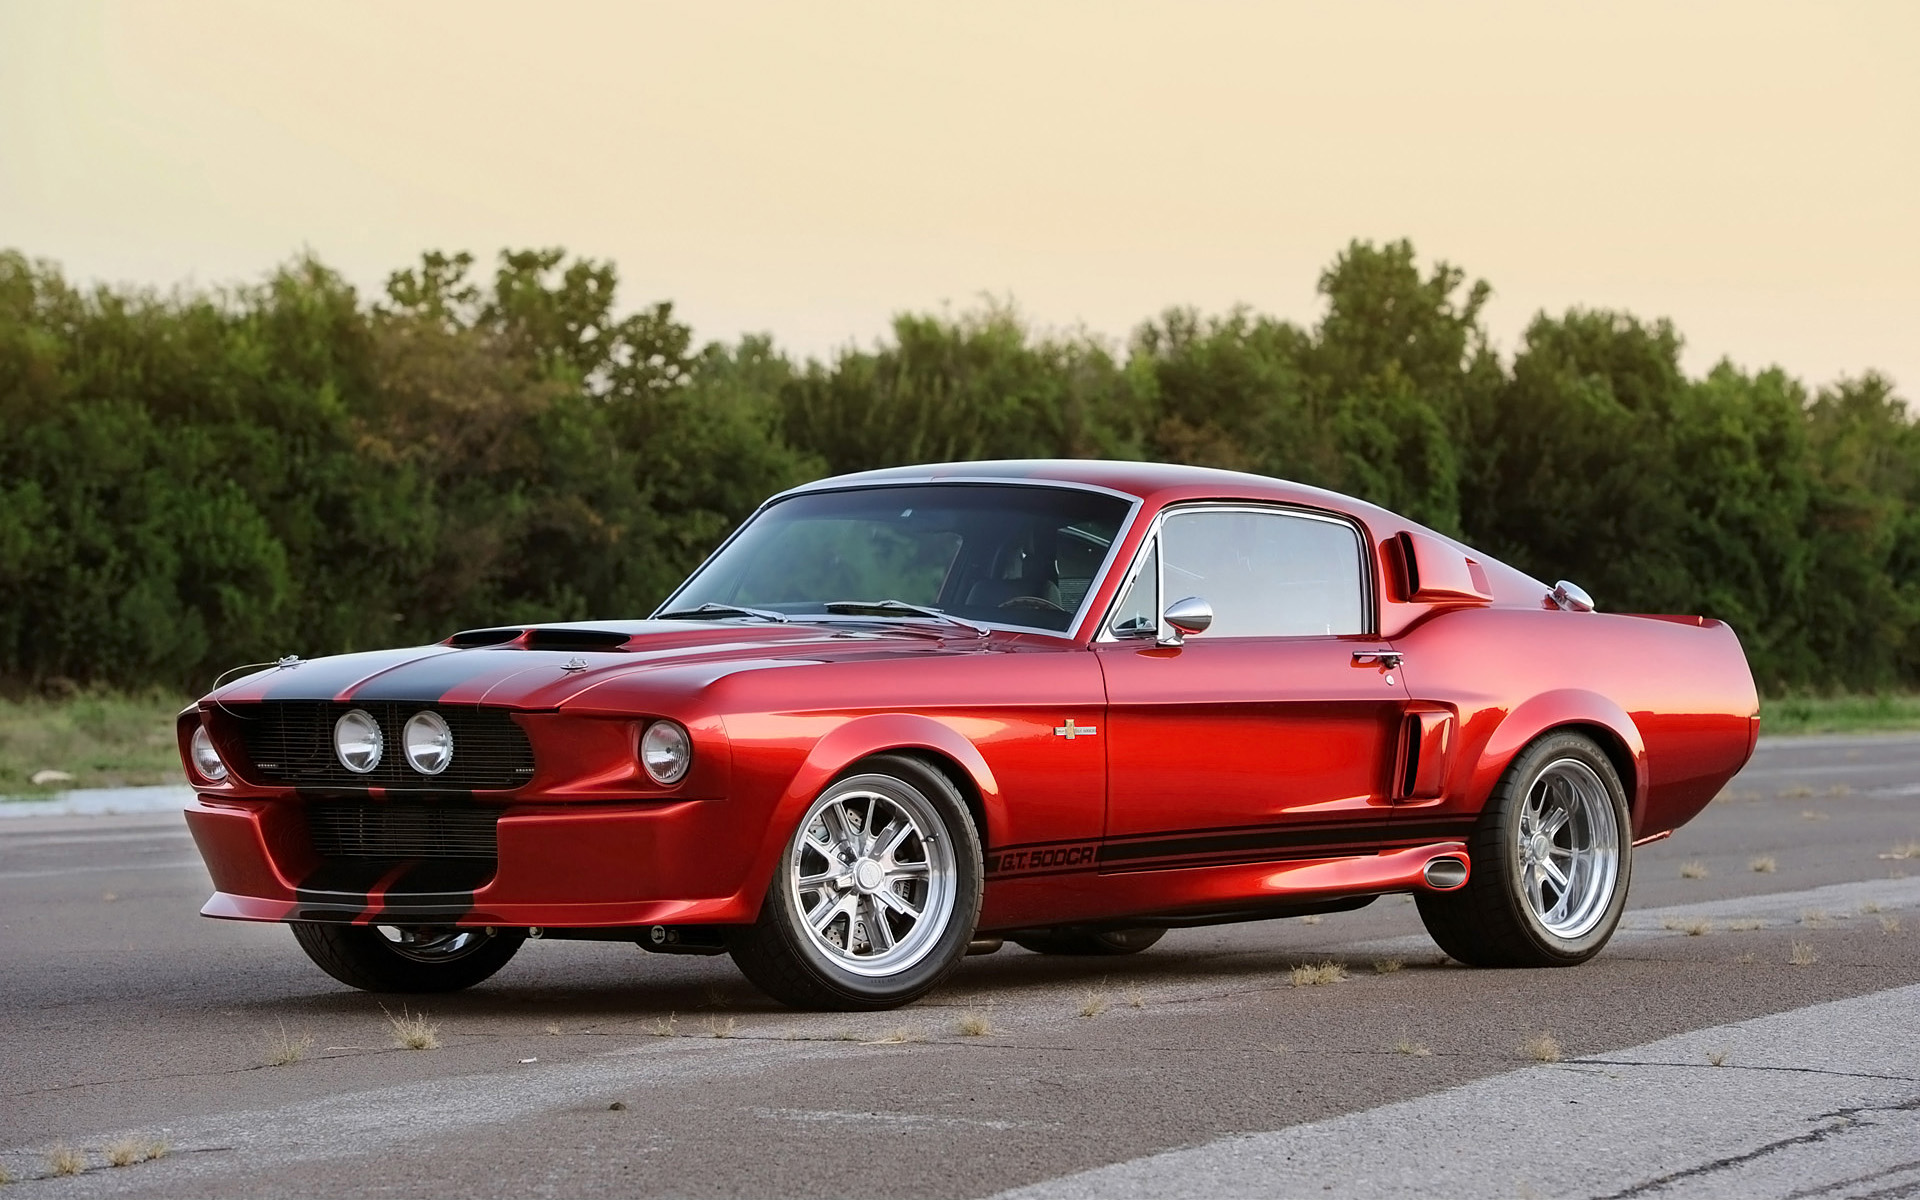  2011 Shelby Classic Recreations GT500CR Wallpaper.